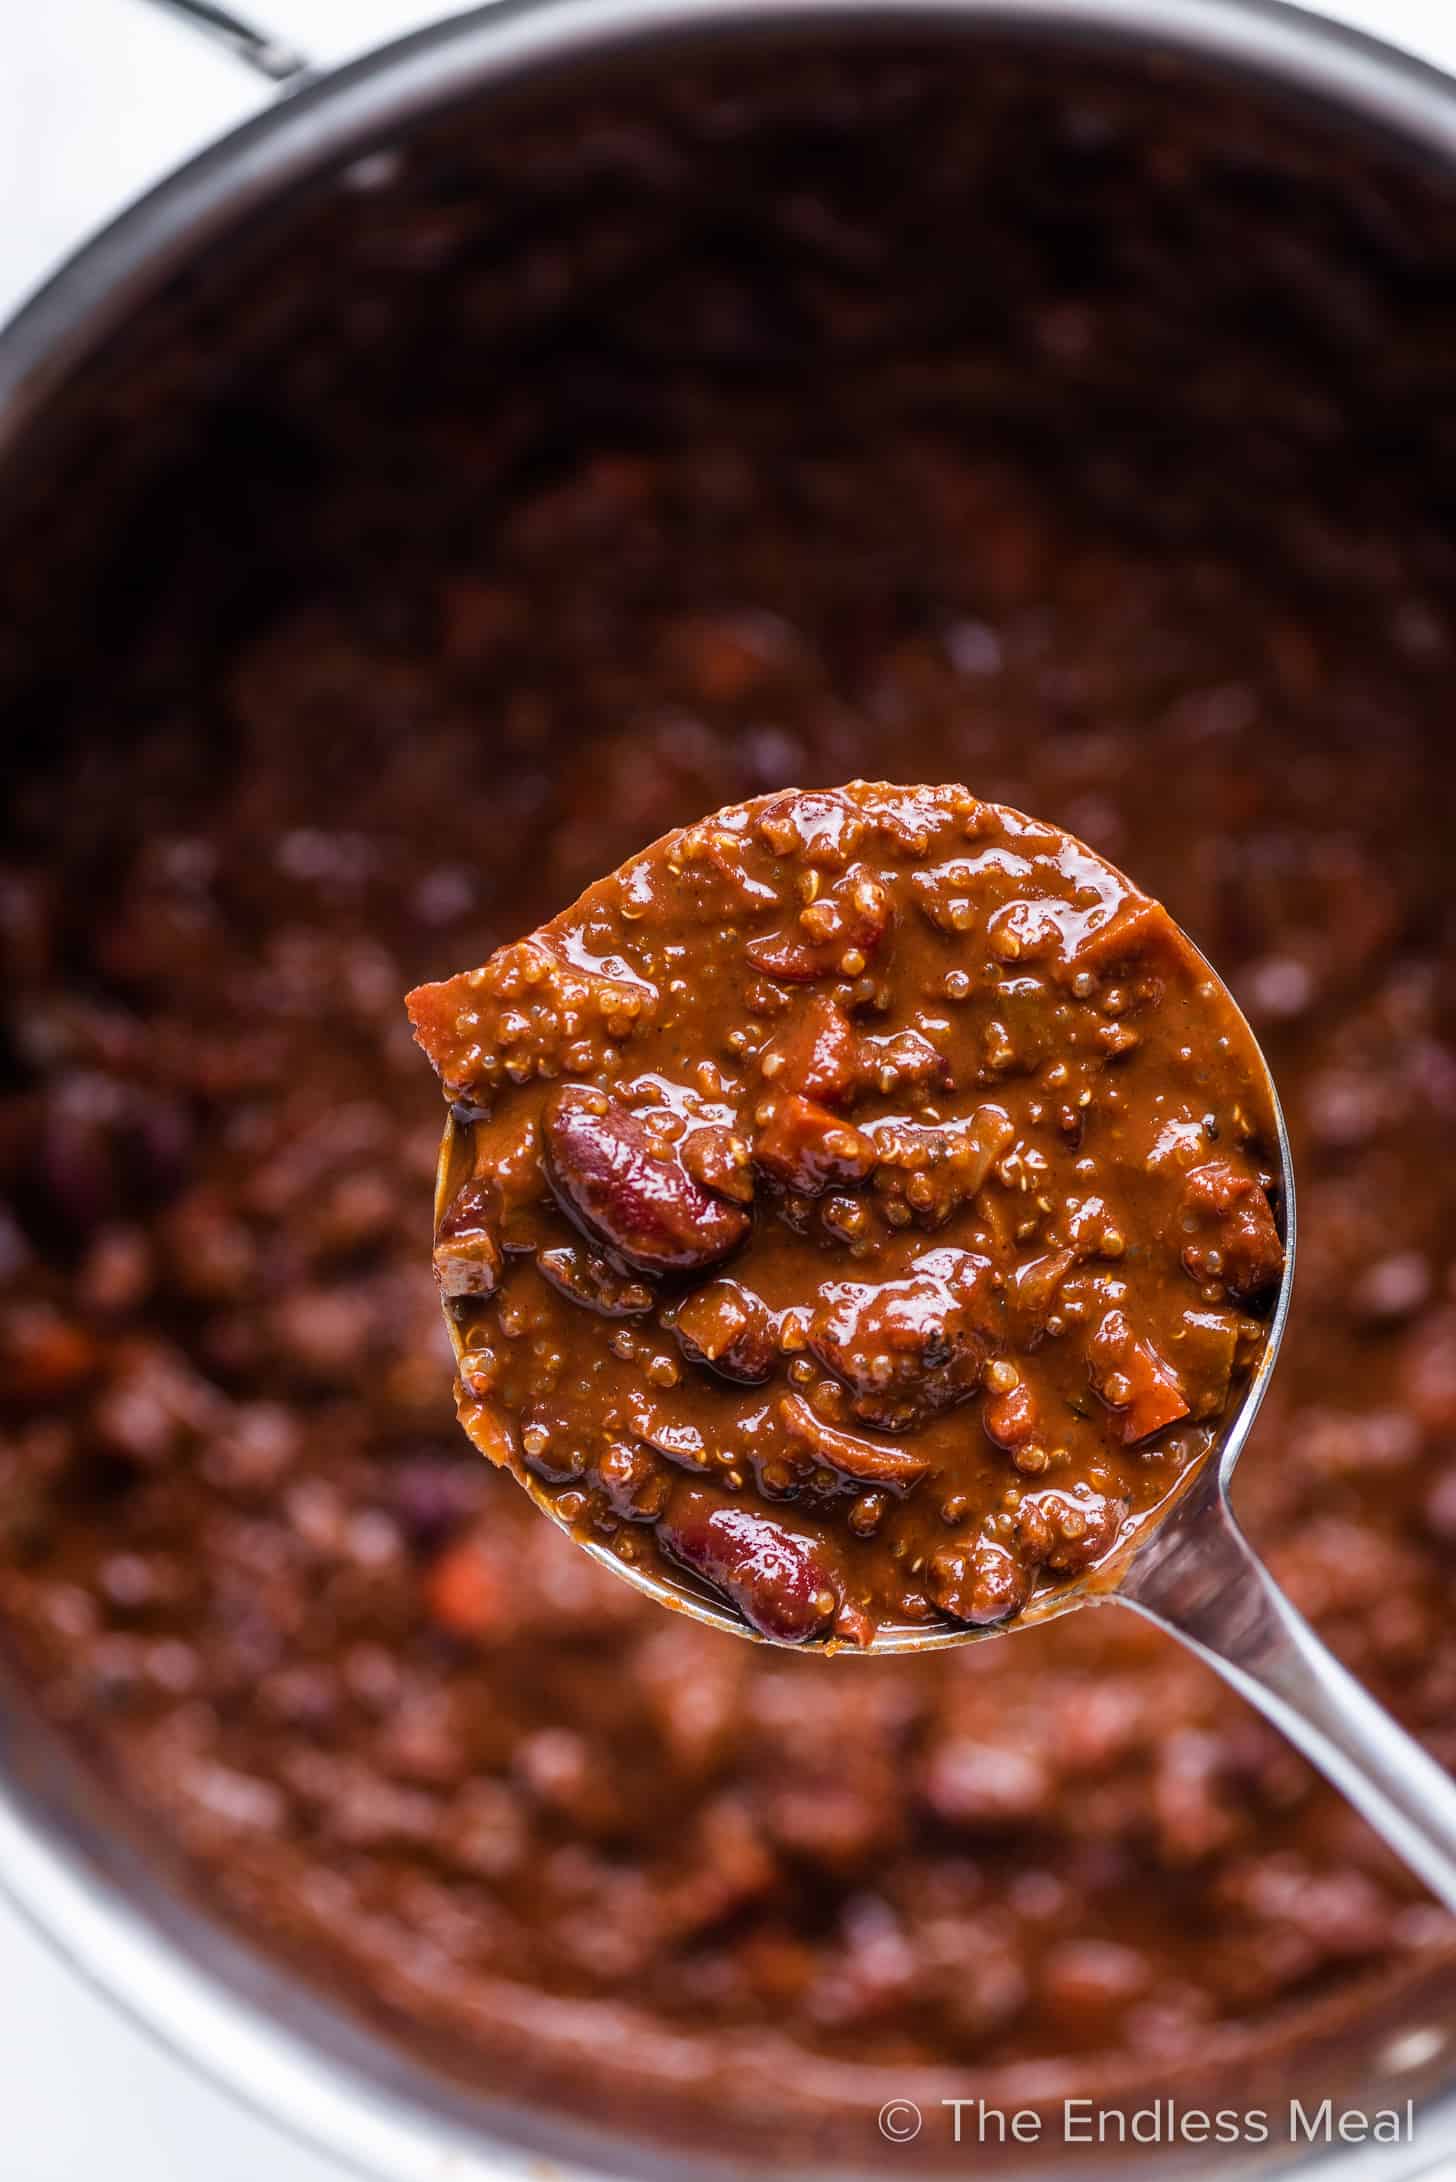 a ladle scooping up chocolate quinoa chili from a pot